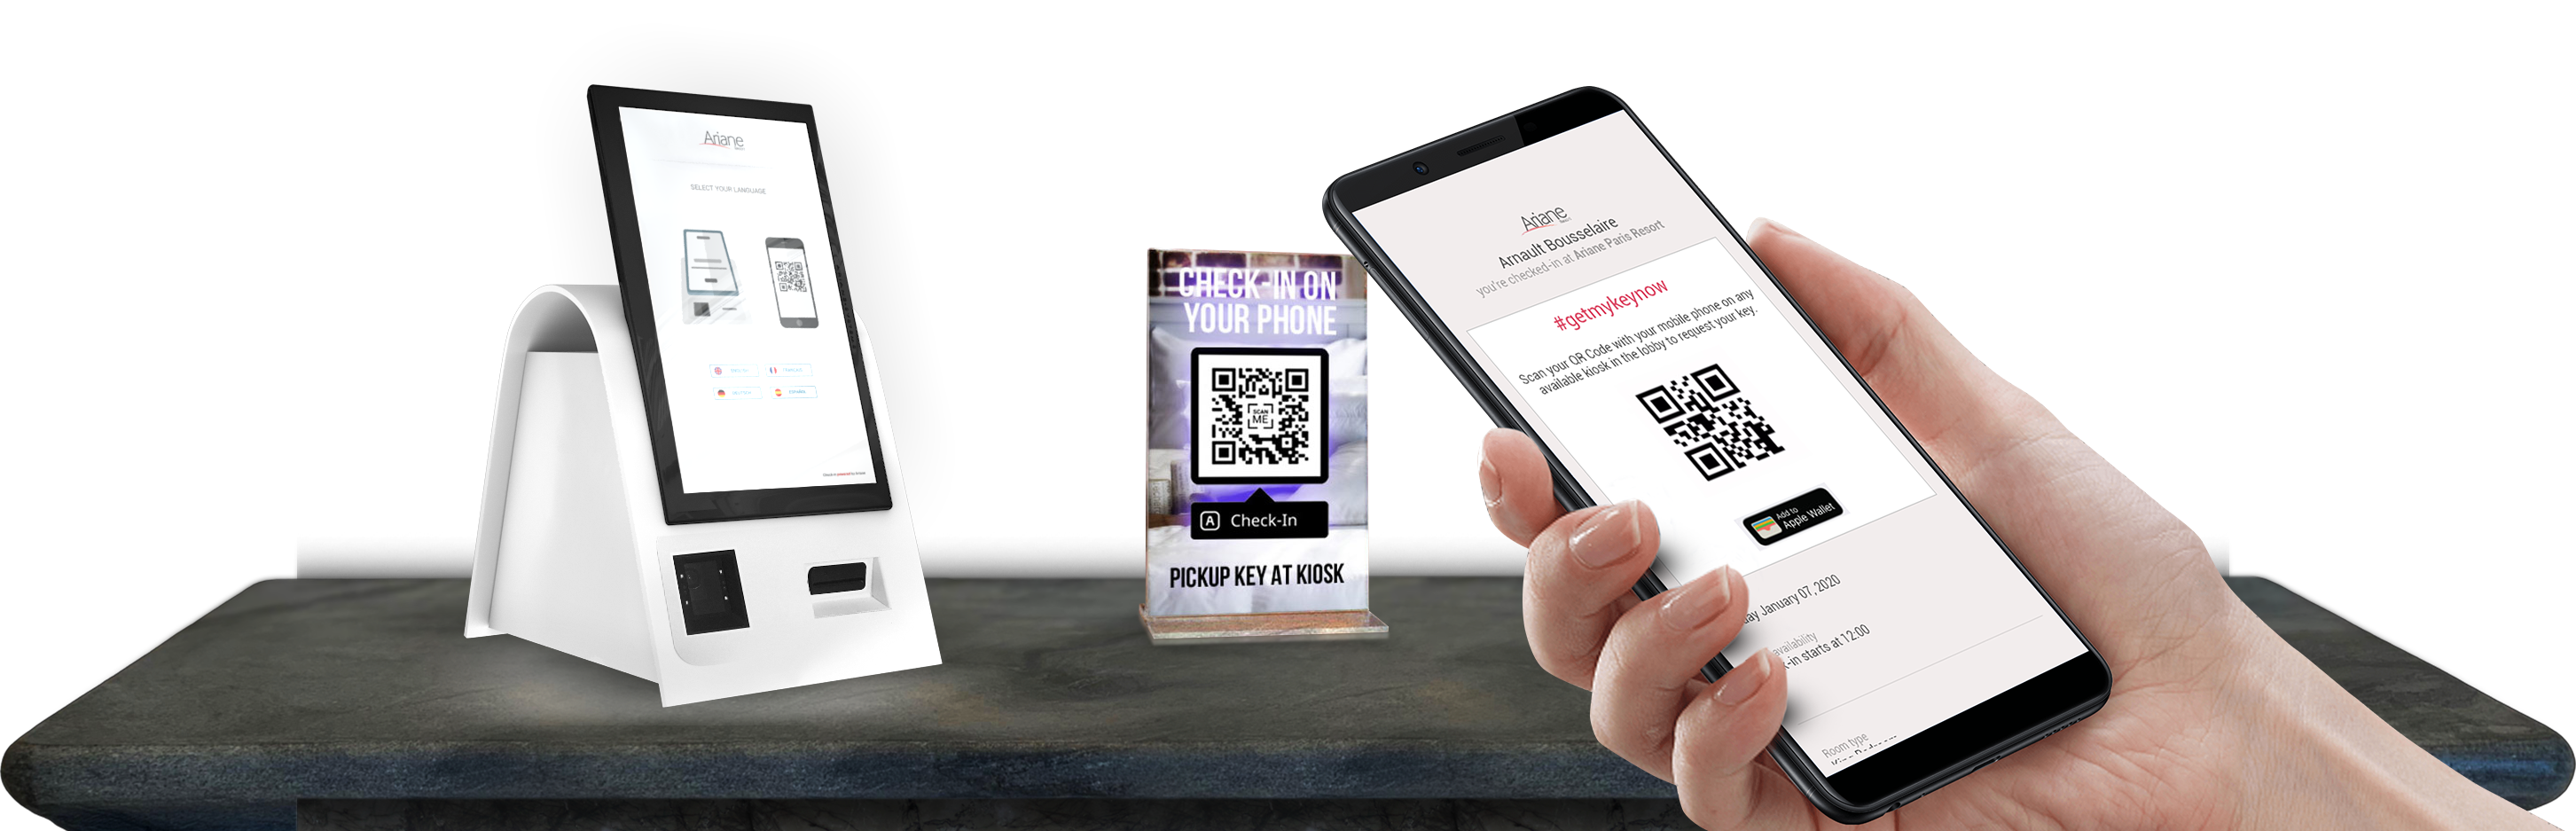 Check-in on your phone with a QR code and your mobile phone